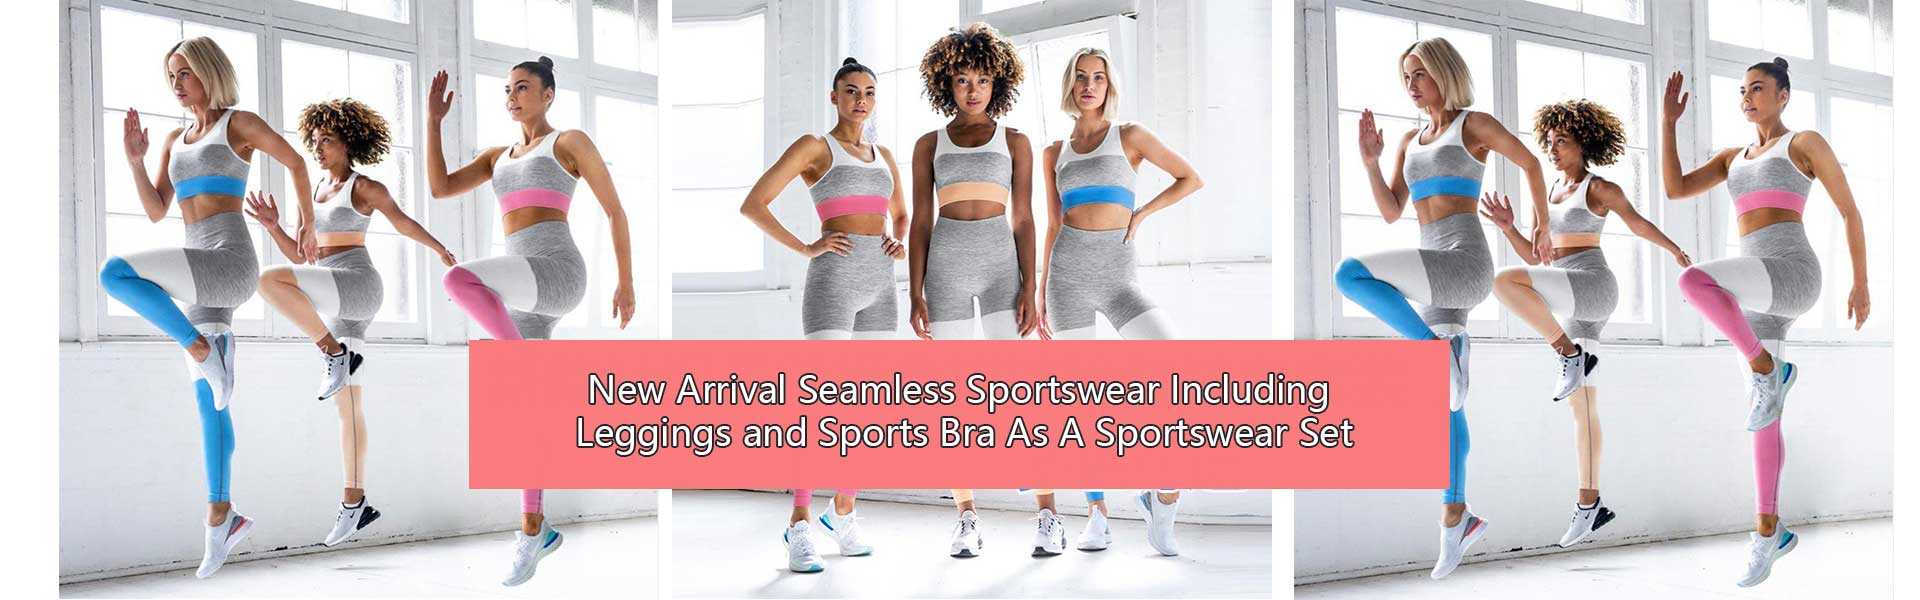 New-Arrival-Seamless-sportswear-including-leggings-and-sports-bra-as-a-set-and-rich-color-for-you-choice